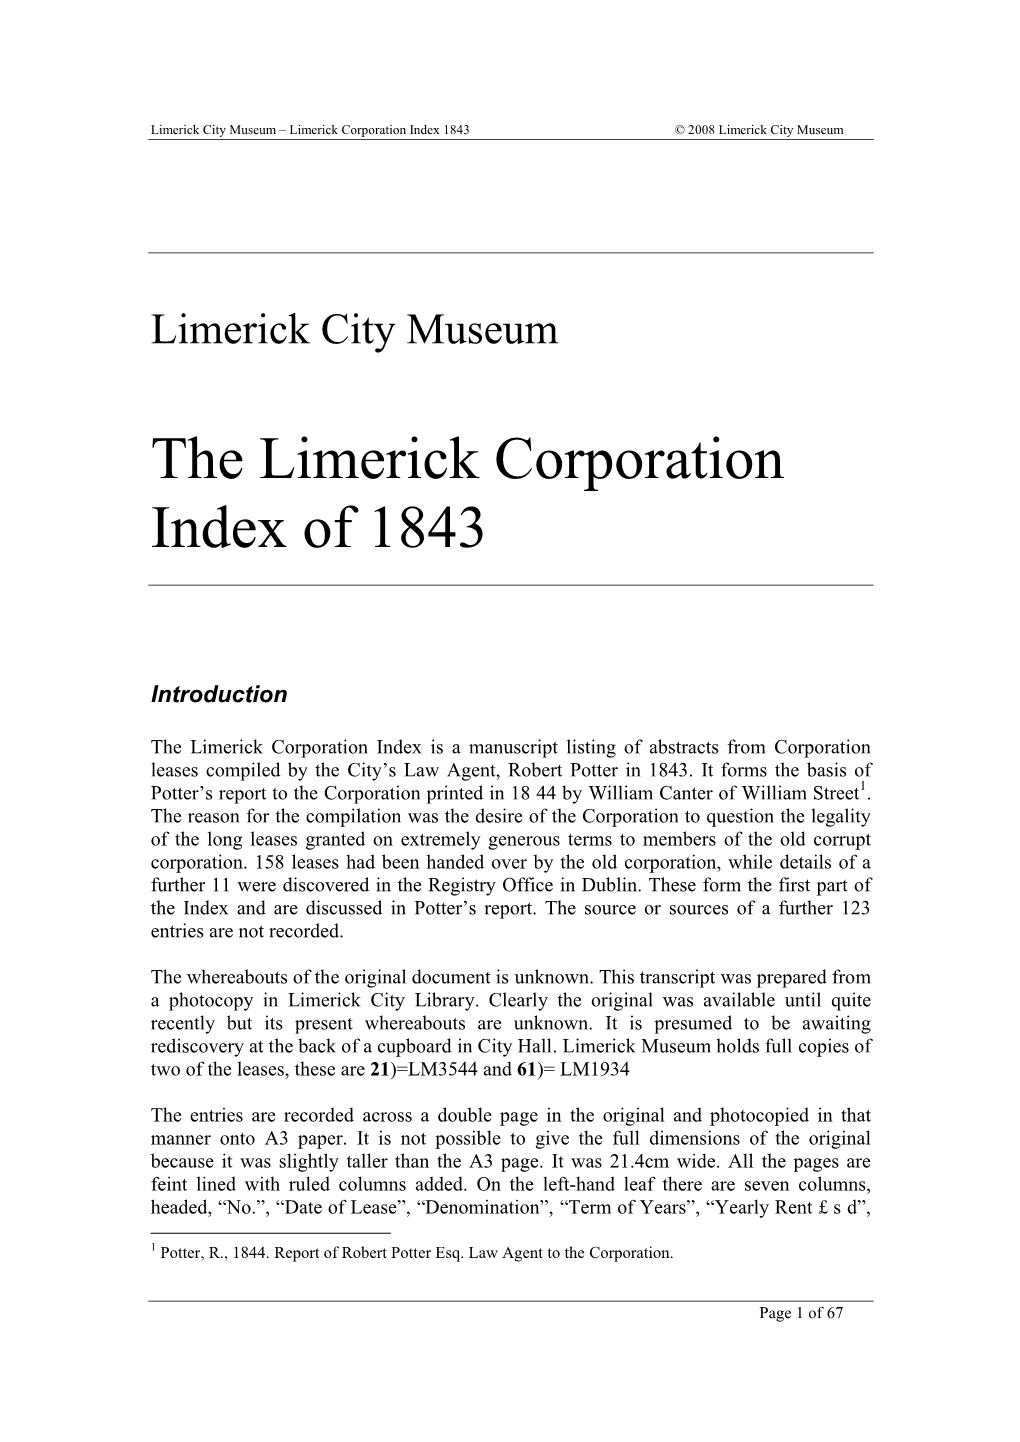 The Limerick Corporation Index of 1843